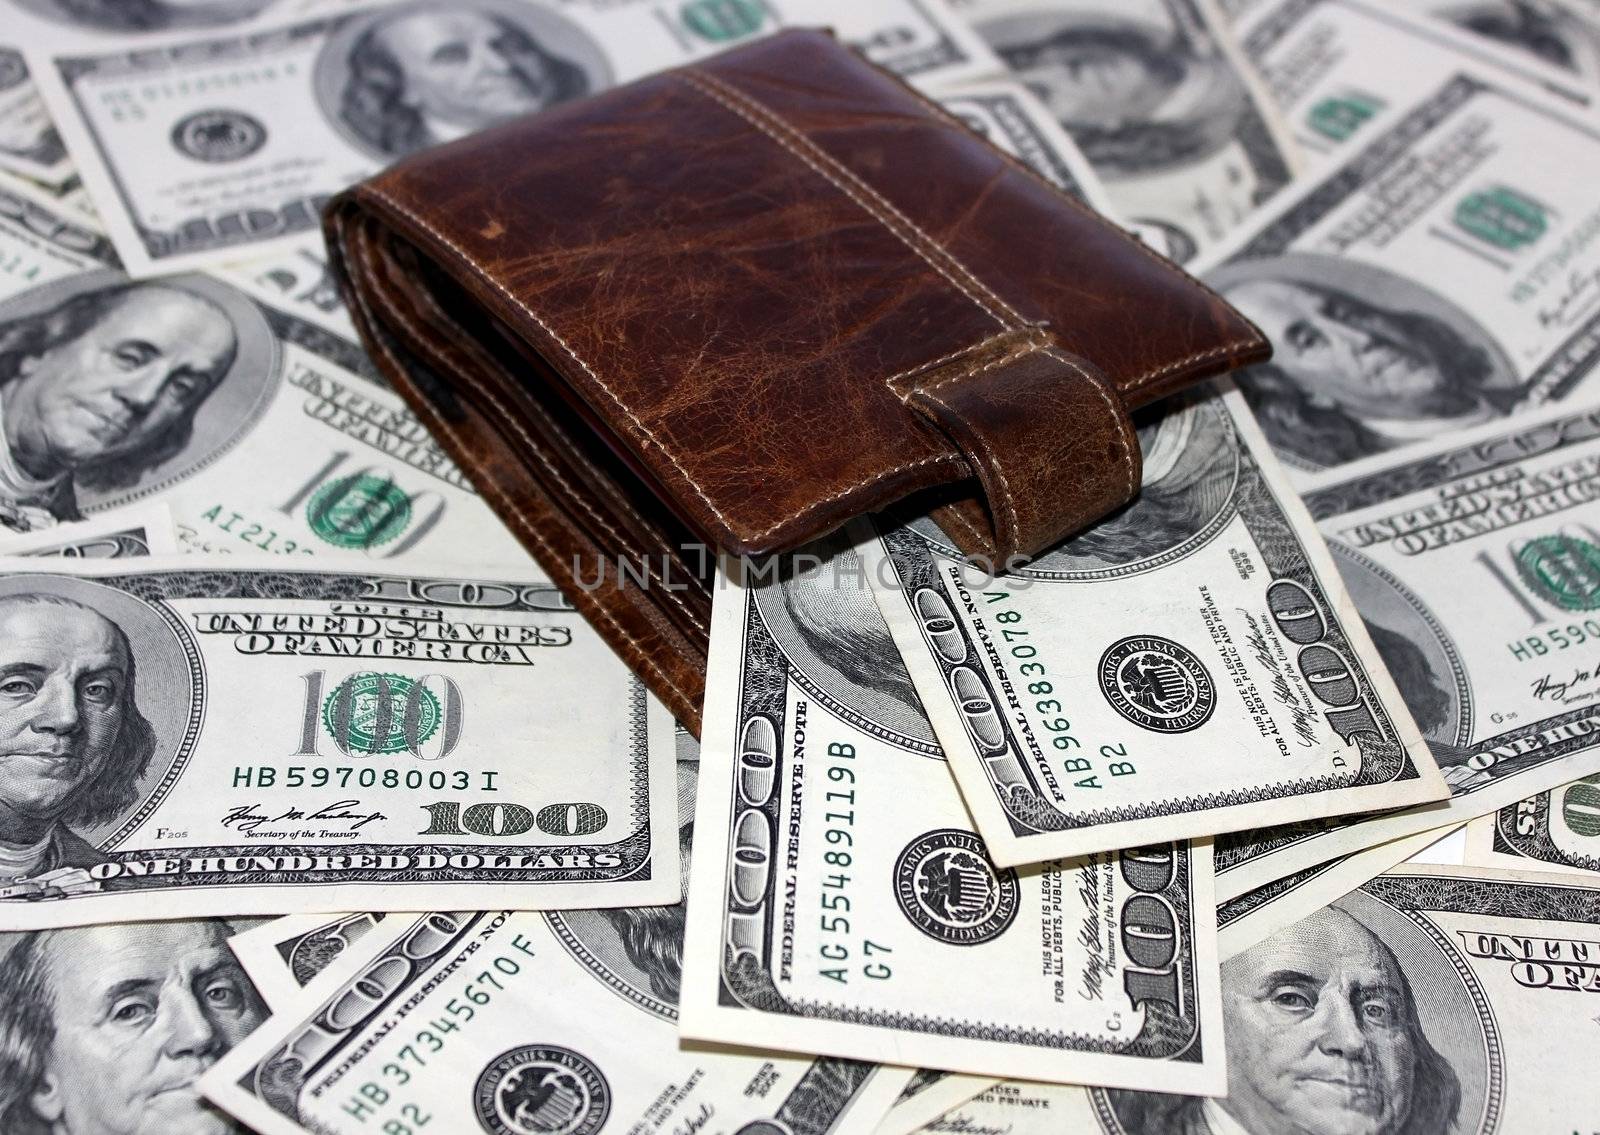 leather purse and dollars by irisphoto4